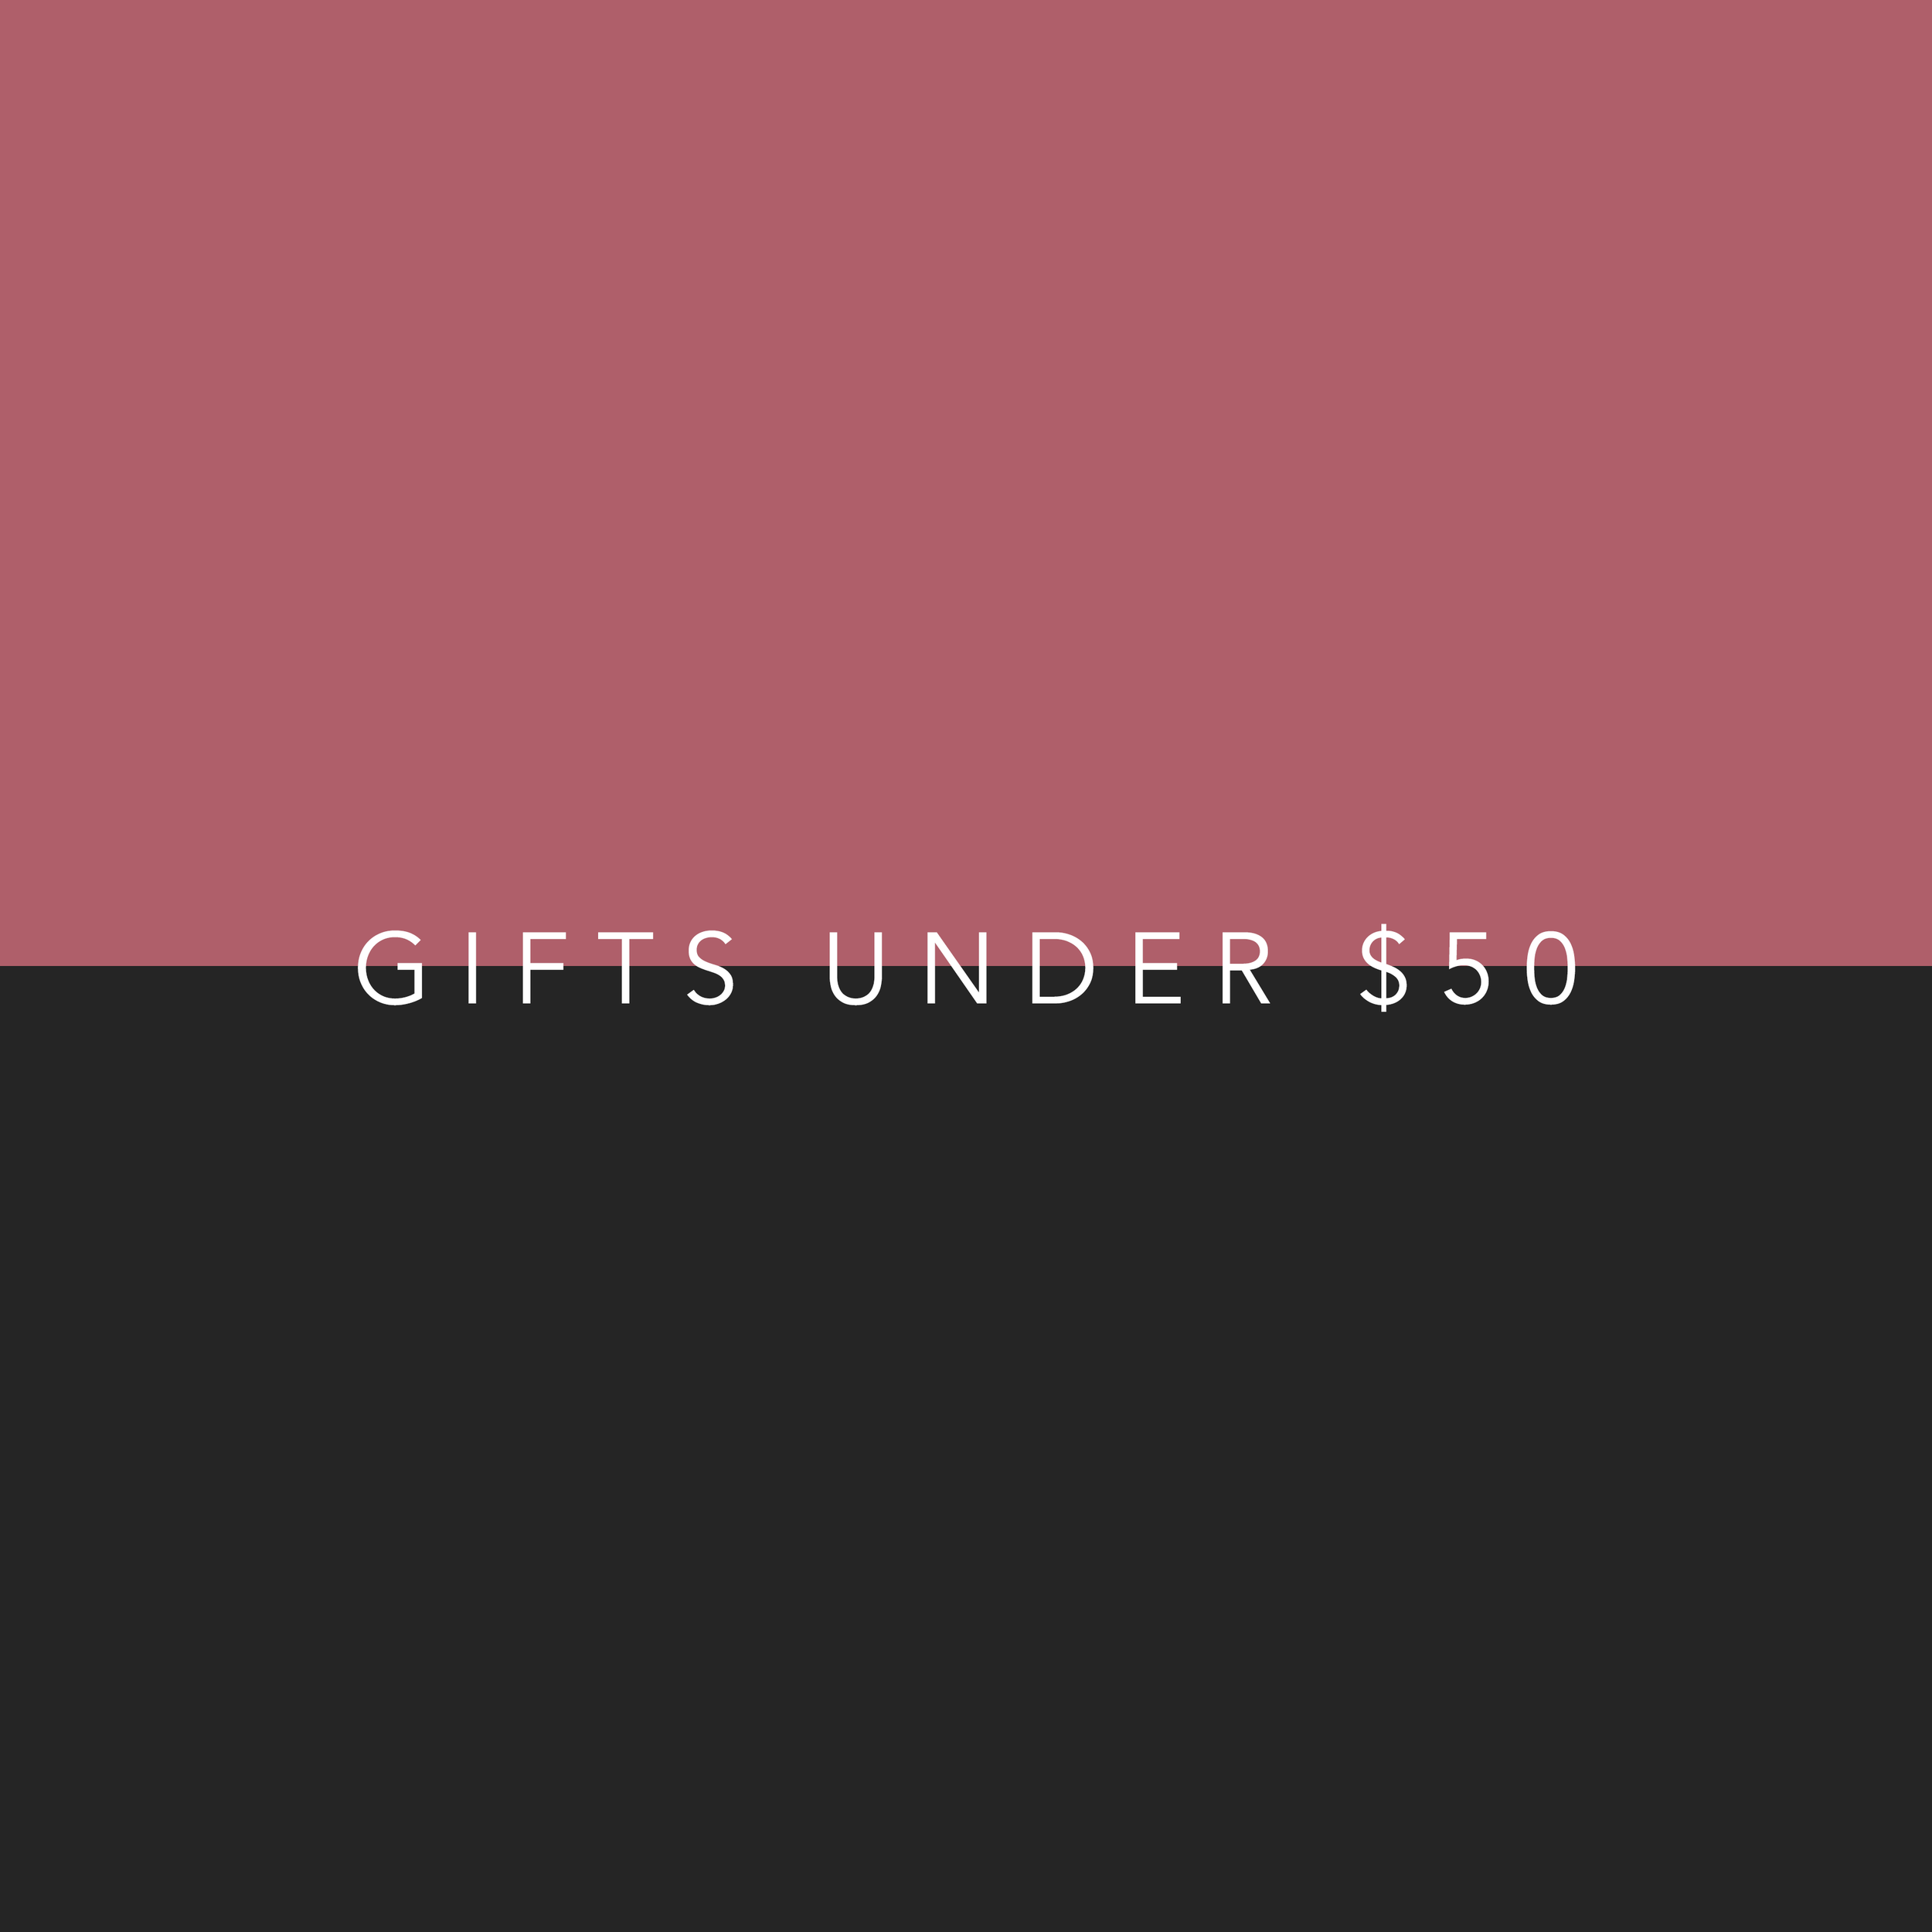 GIFTS-UNDER-50.png